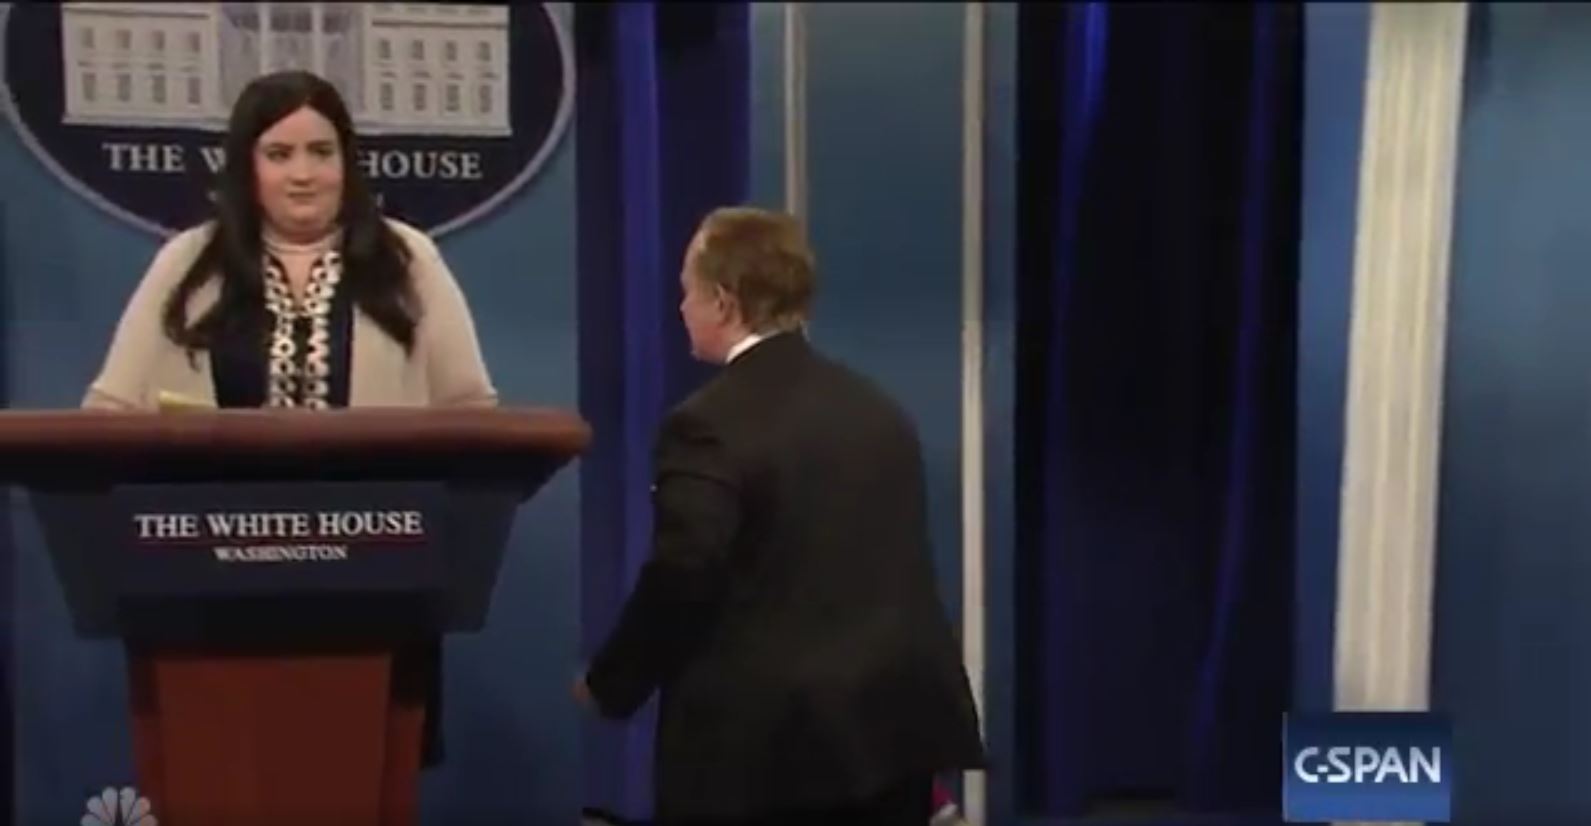 PHOTO: "SNL" cast member Aidy Bryant as deputy White House press secretary Sarah Huckabee Sanders (left) and Melissa McCarthy as Sean Spicer on "Saturday Night Live" on May 13, 2017.